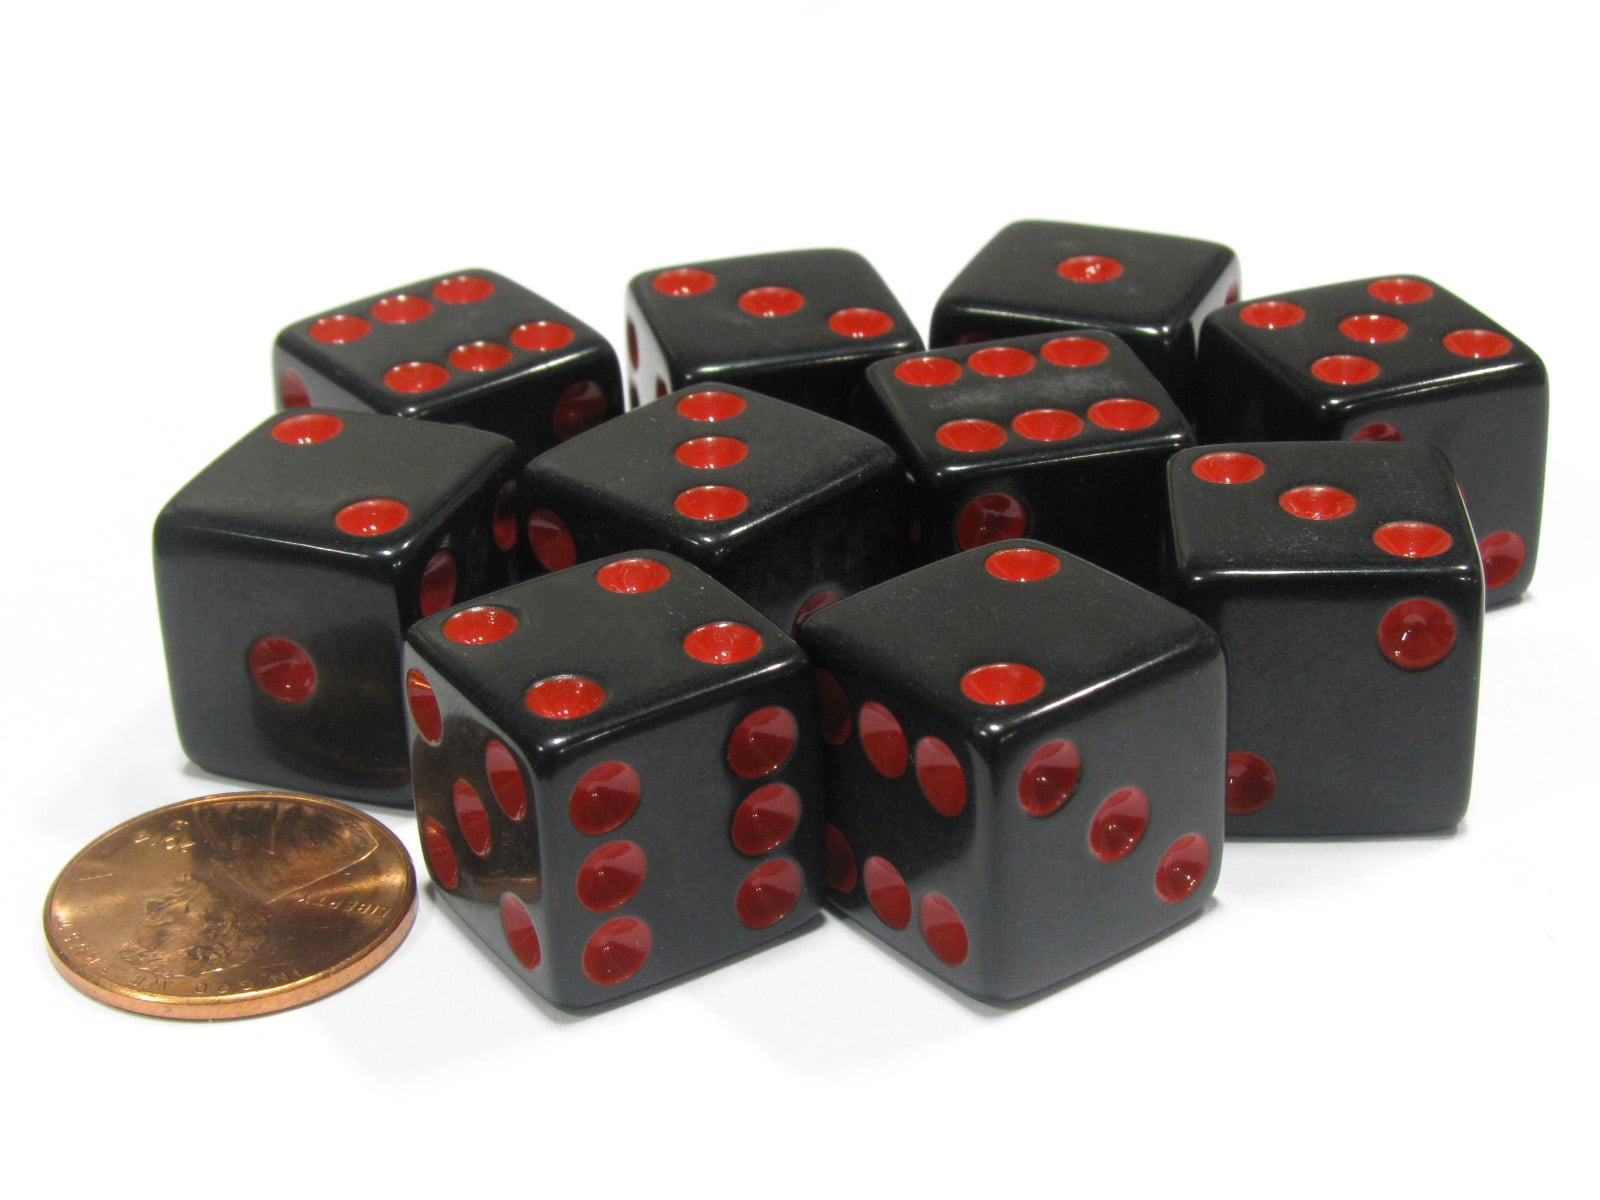 Lot of 20 Red 16mm D6 Dice Square Gaming Casino 